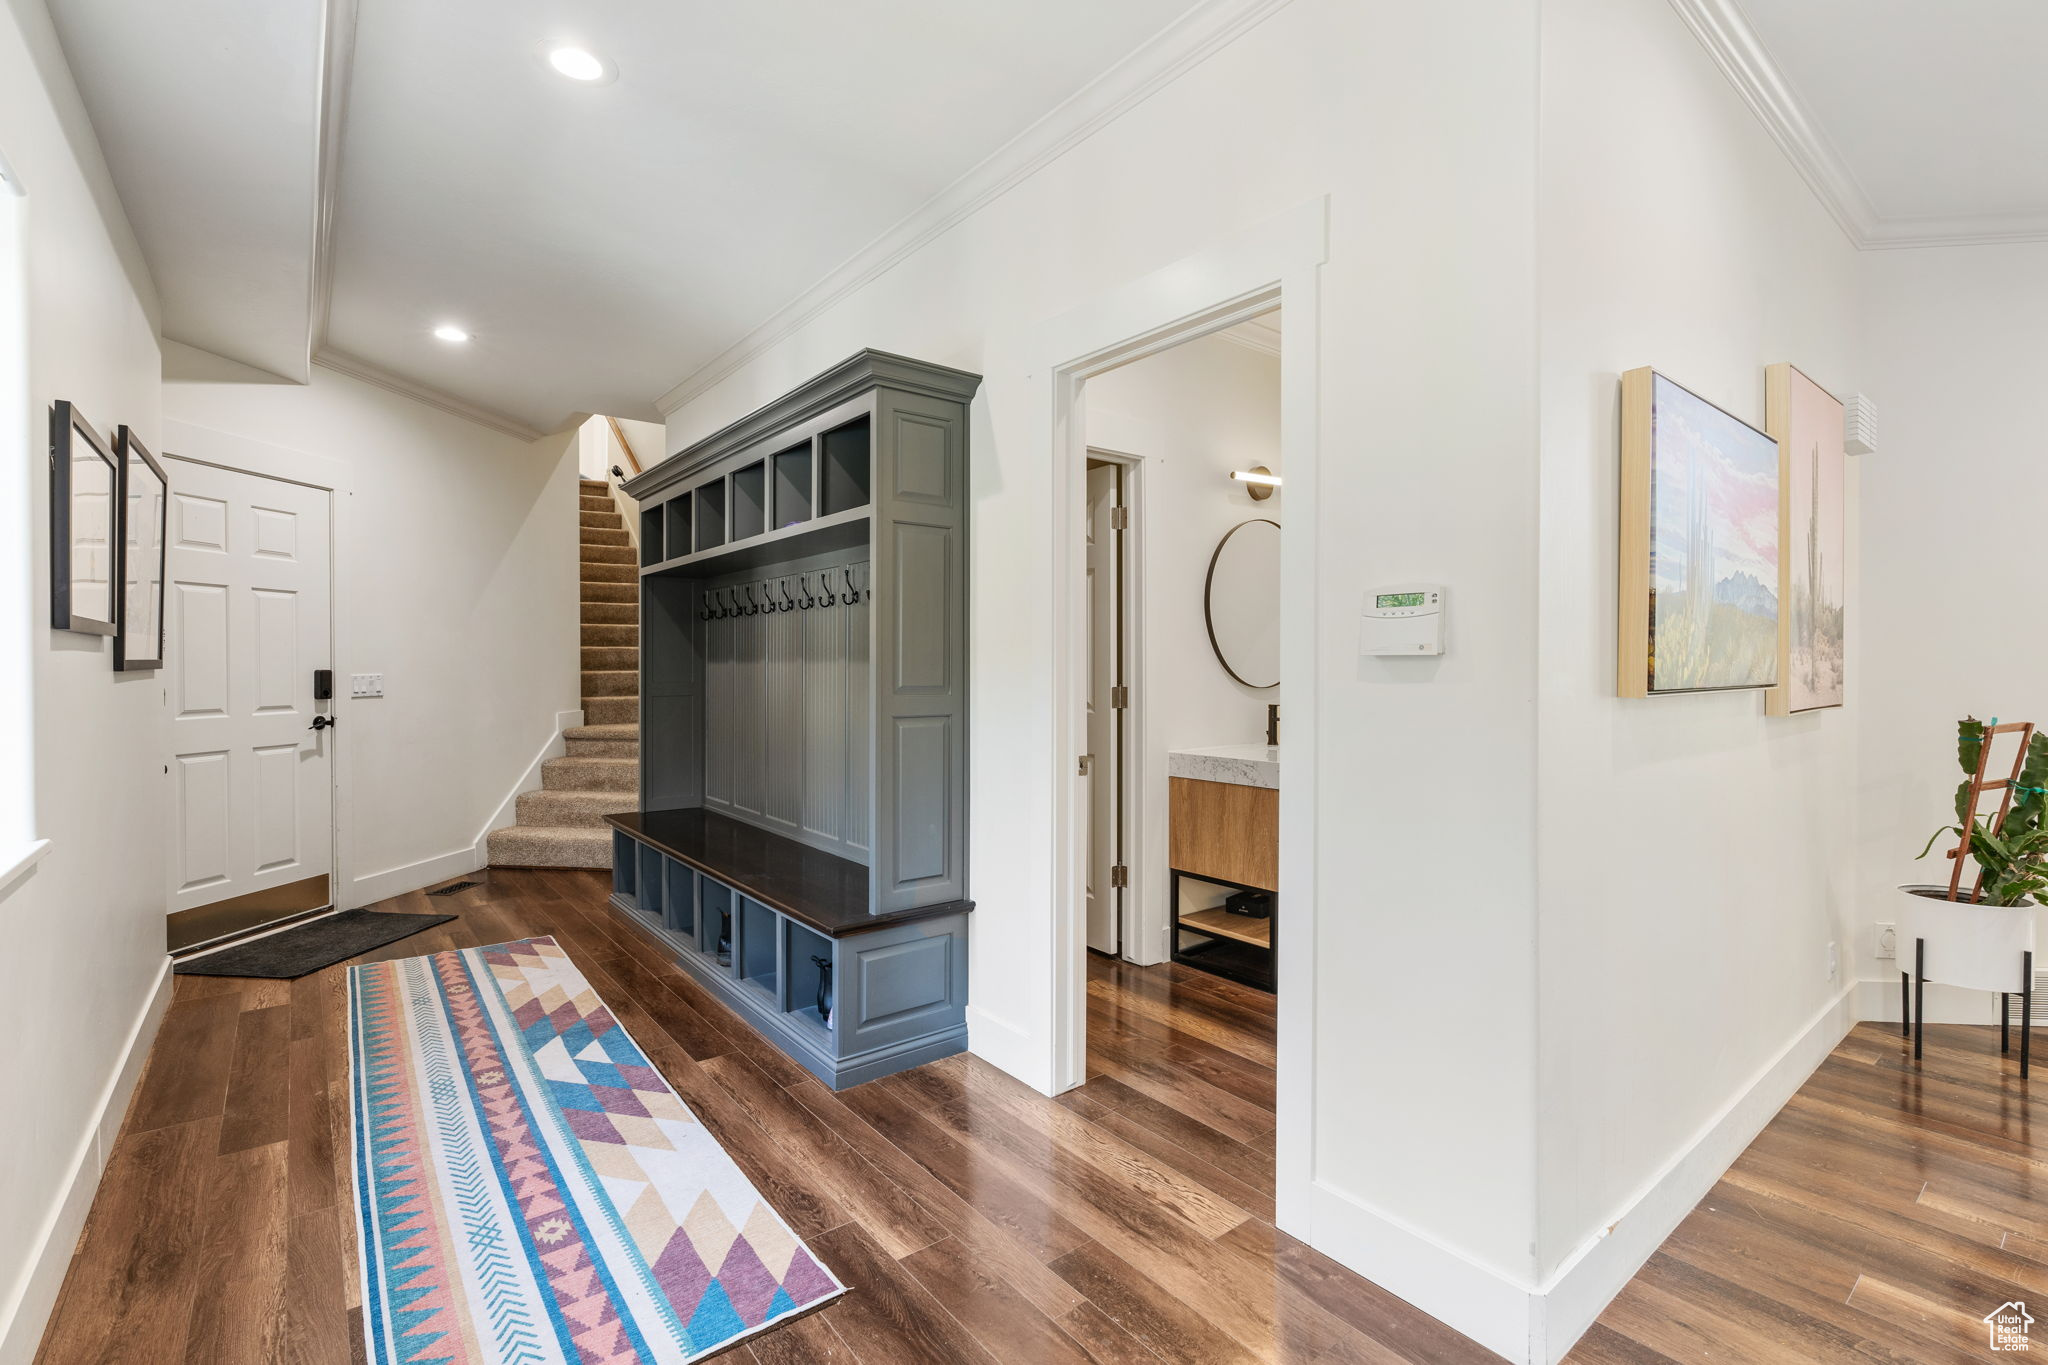 Mudroom with crown molding and dark wood-type flooring